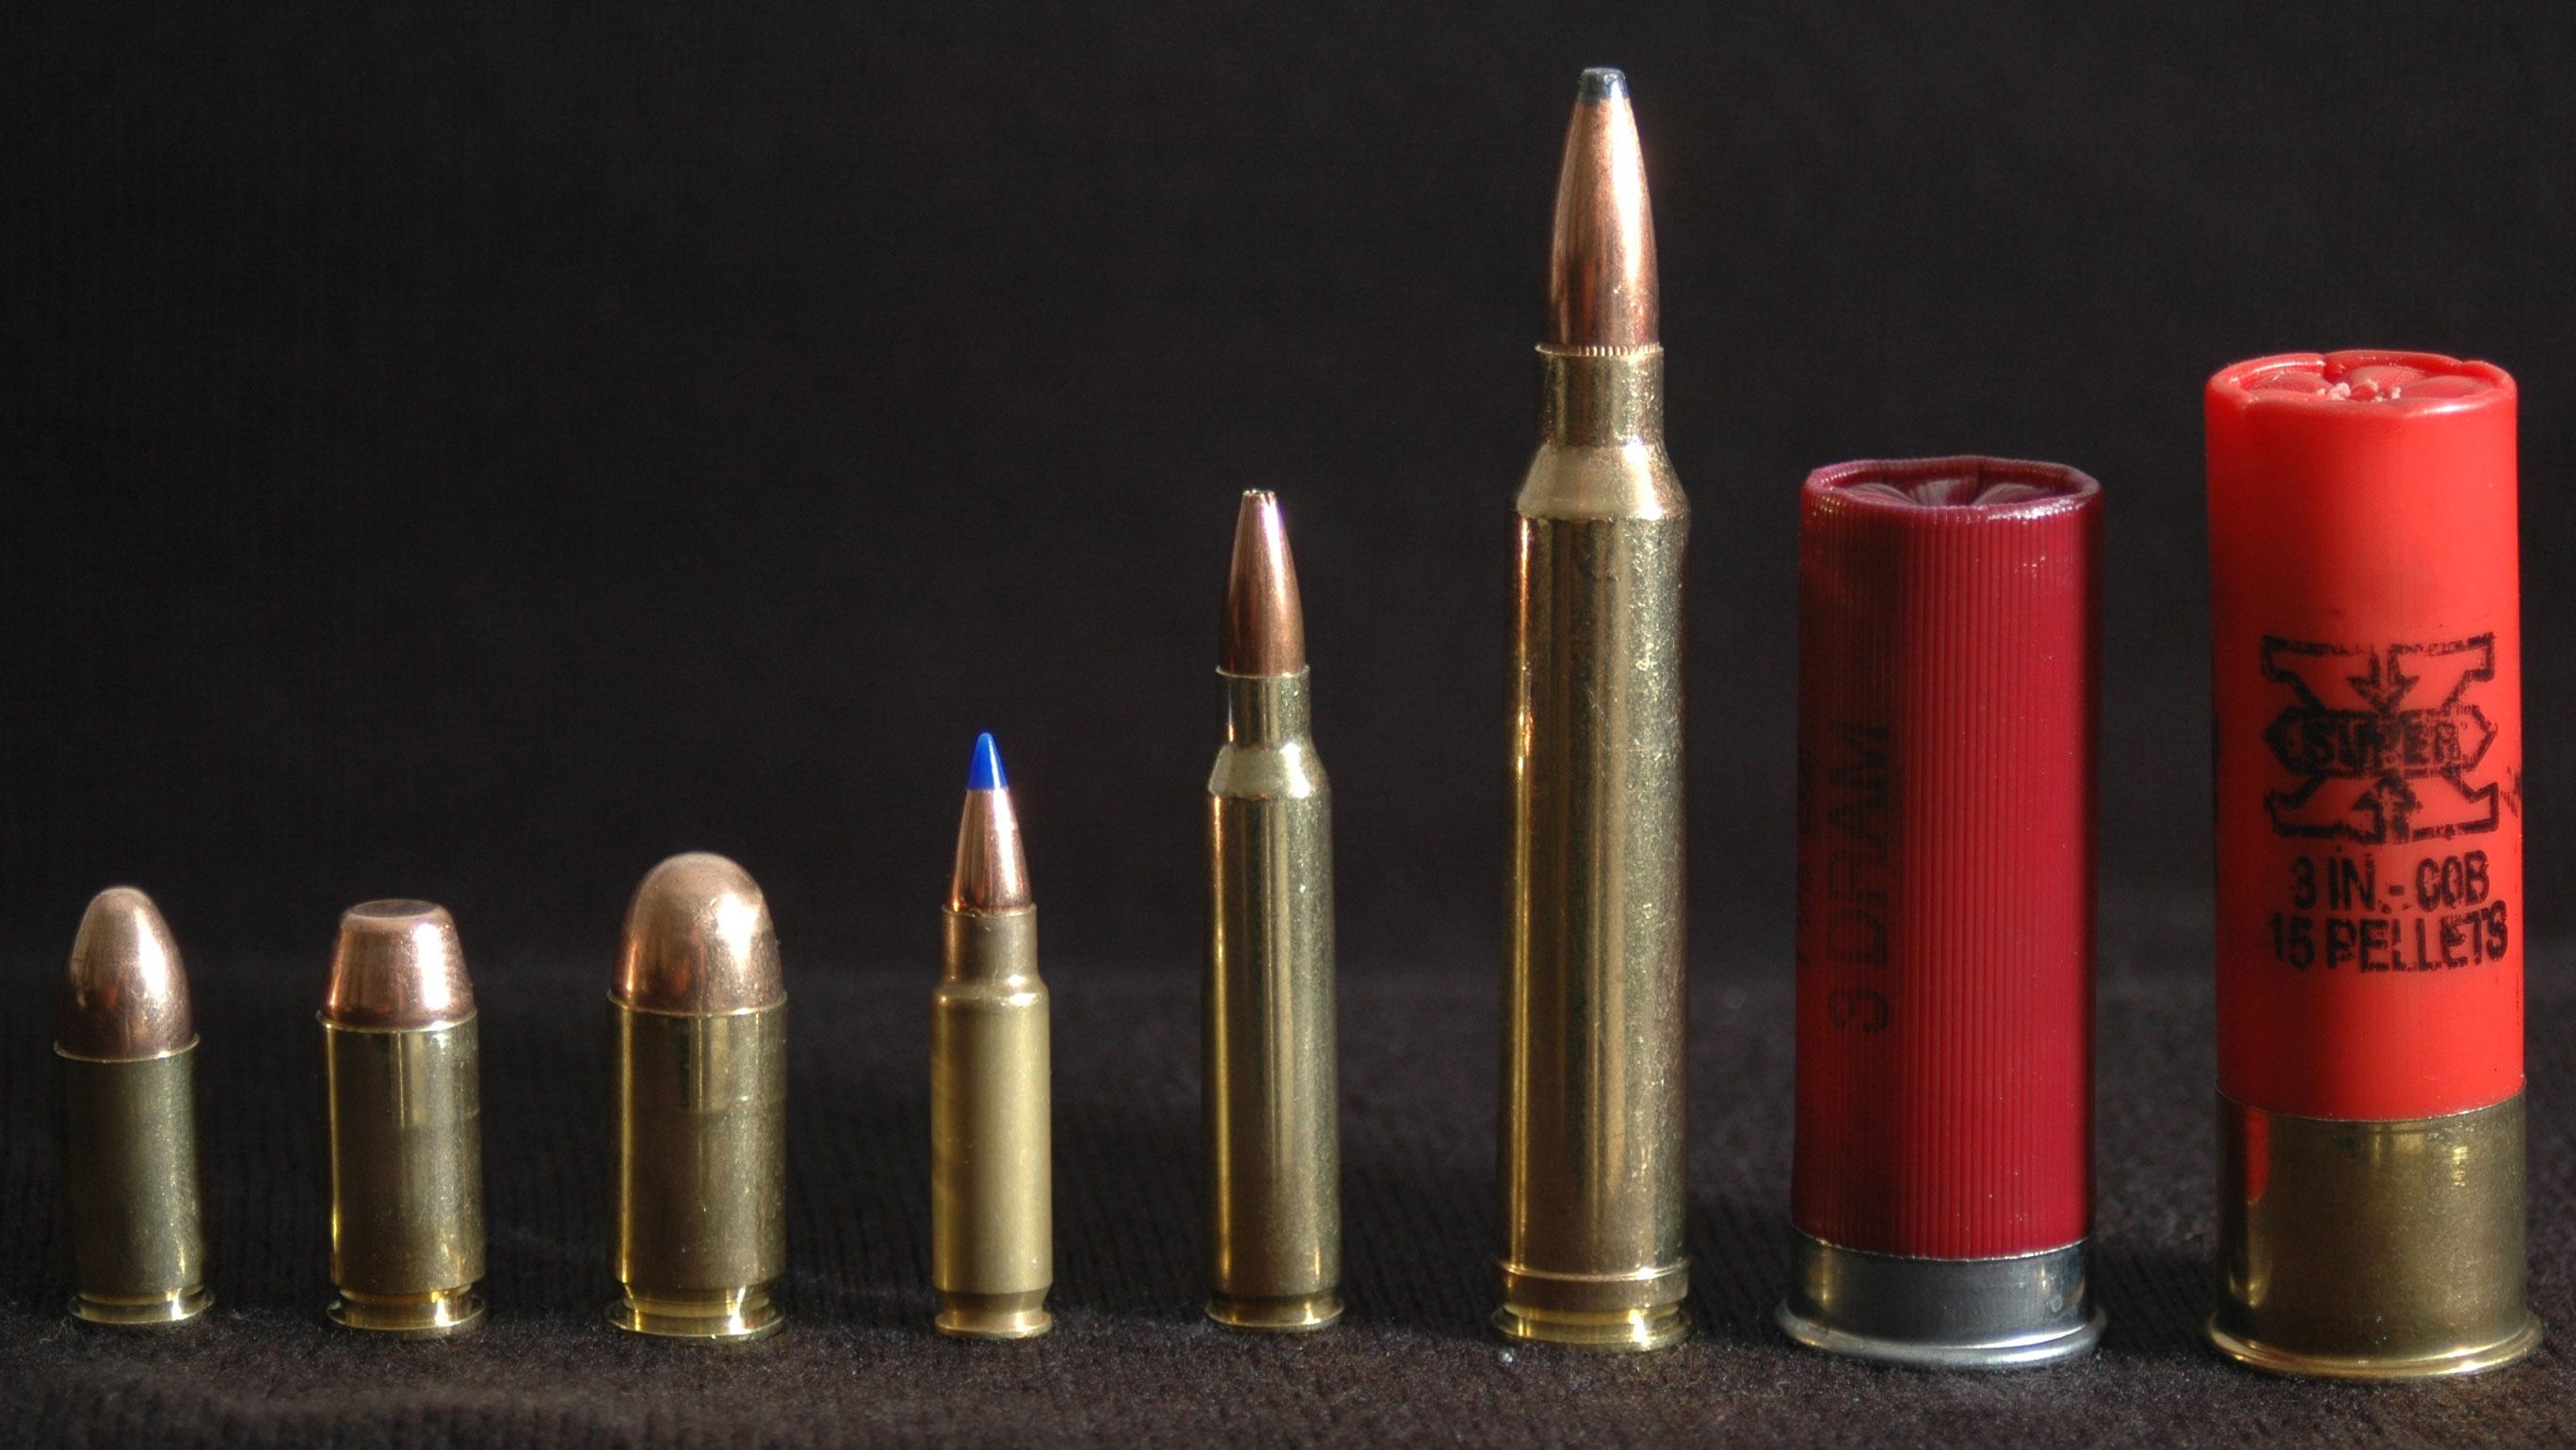 Bullet collection